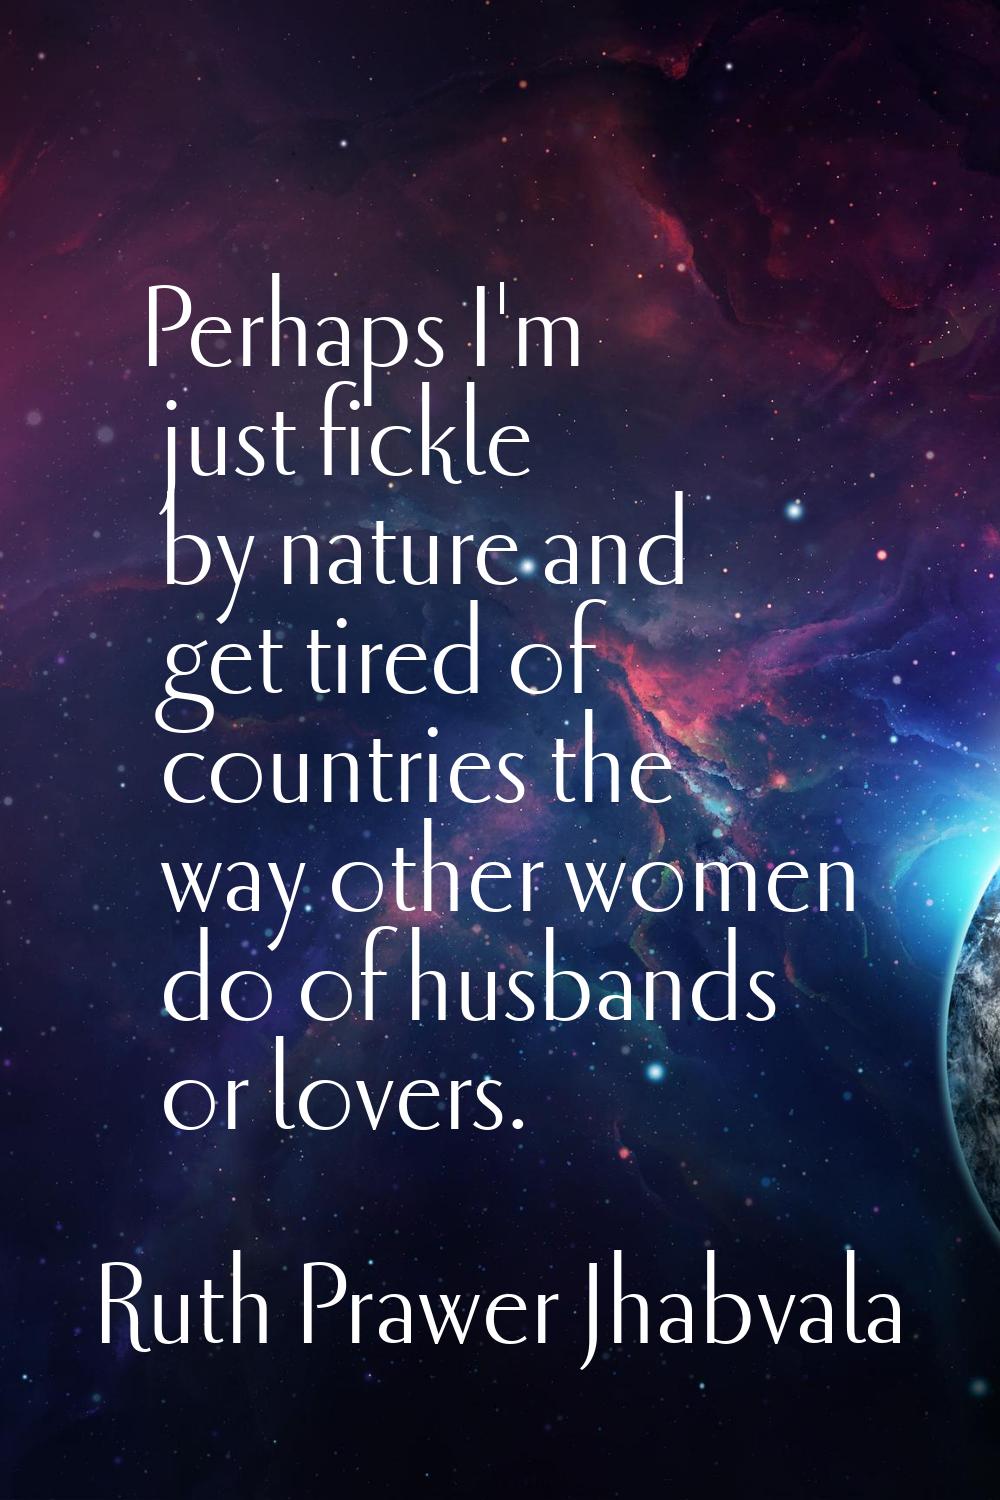 Perhaps I'm just fickle by nature and get tired of countries the way other women do of husbands or 